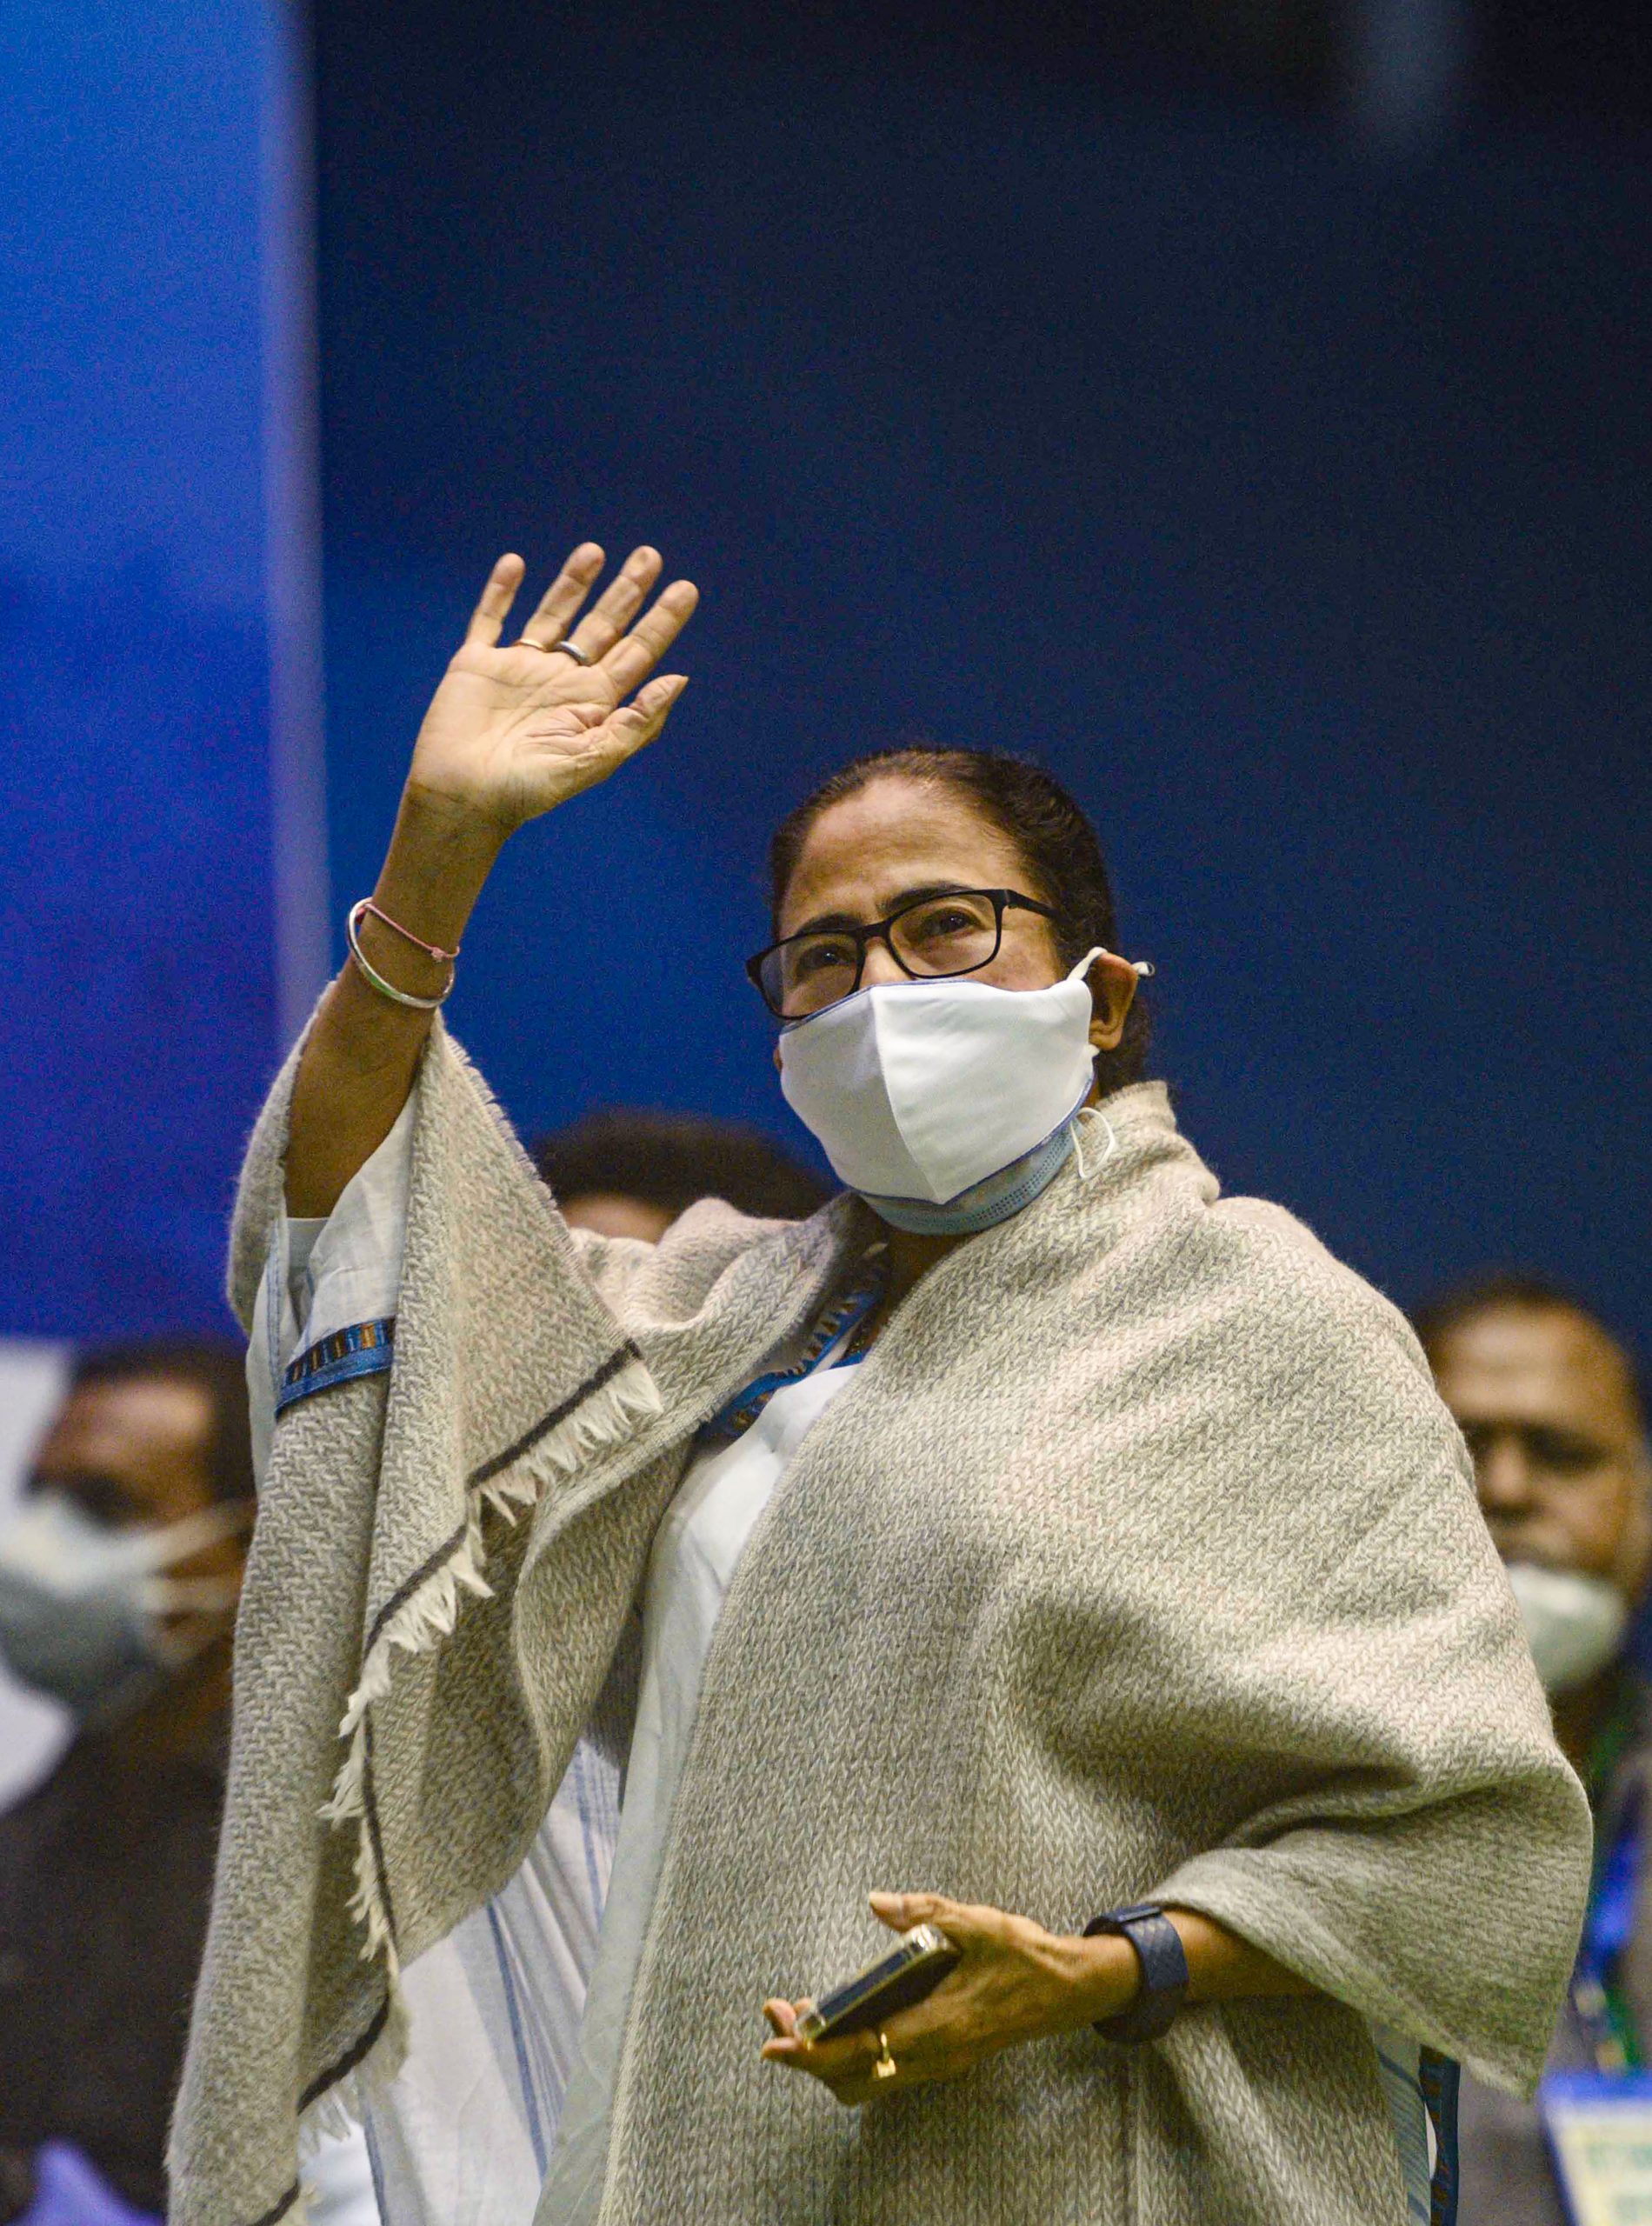 UP Election 2022: Mamata Banerjee says Congress should have allied with Samajwadi Party to win